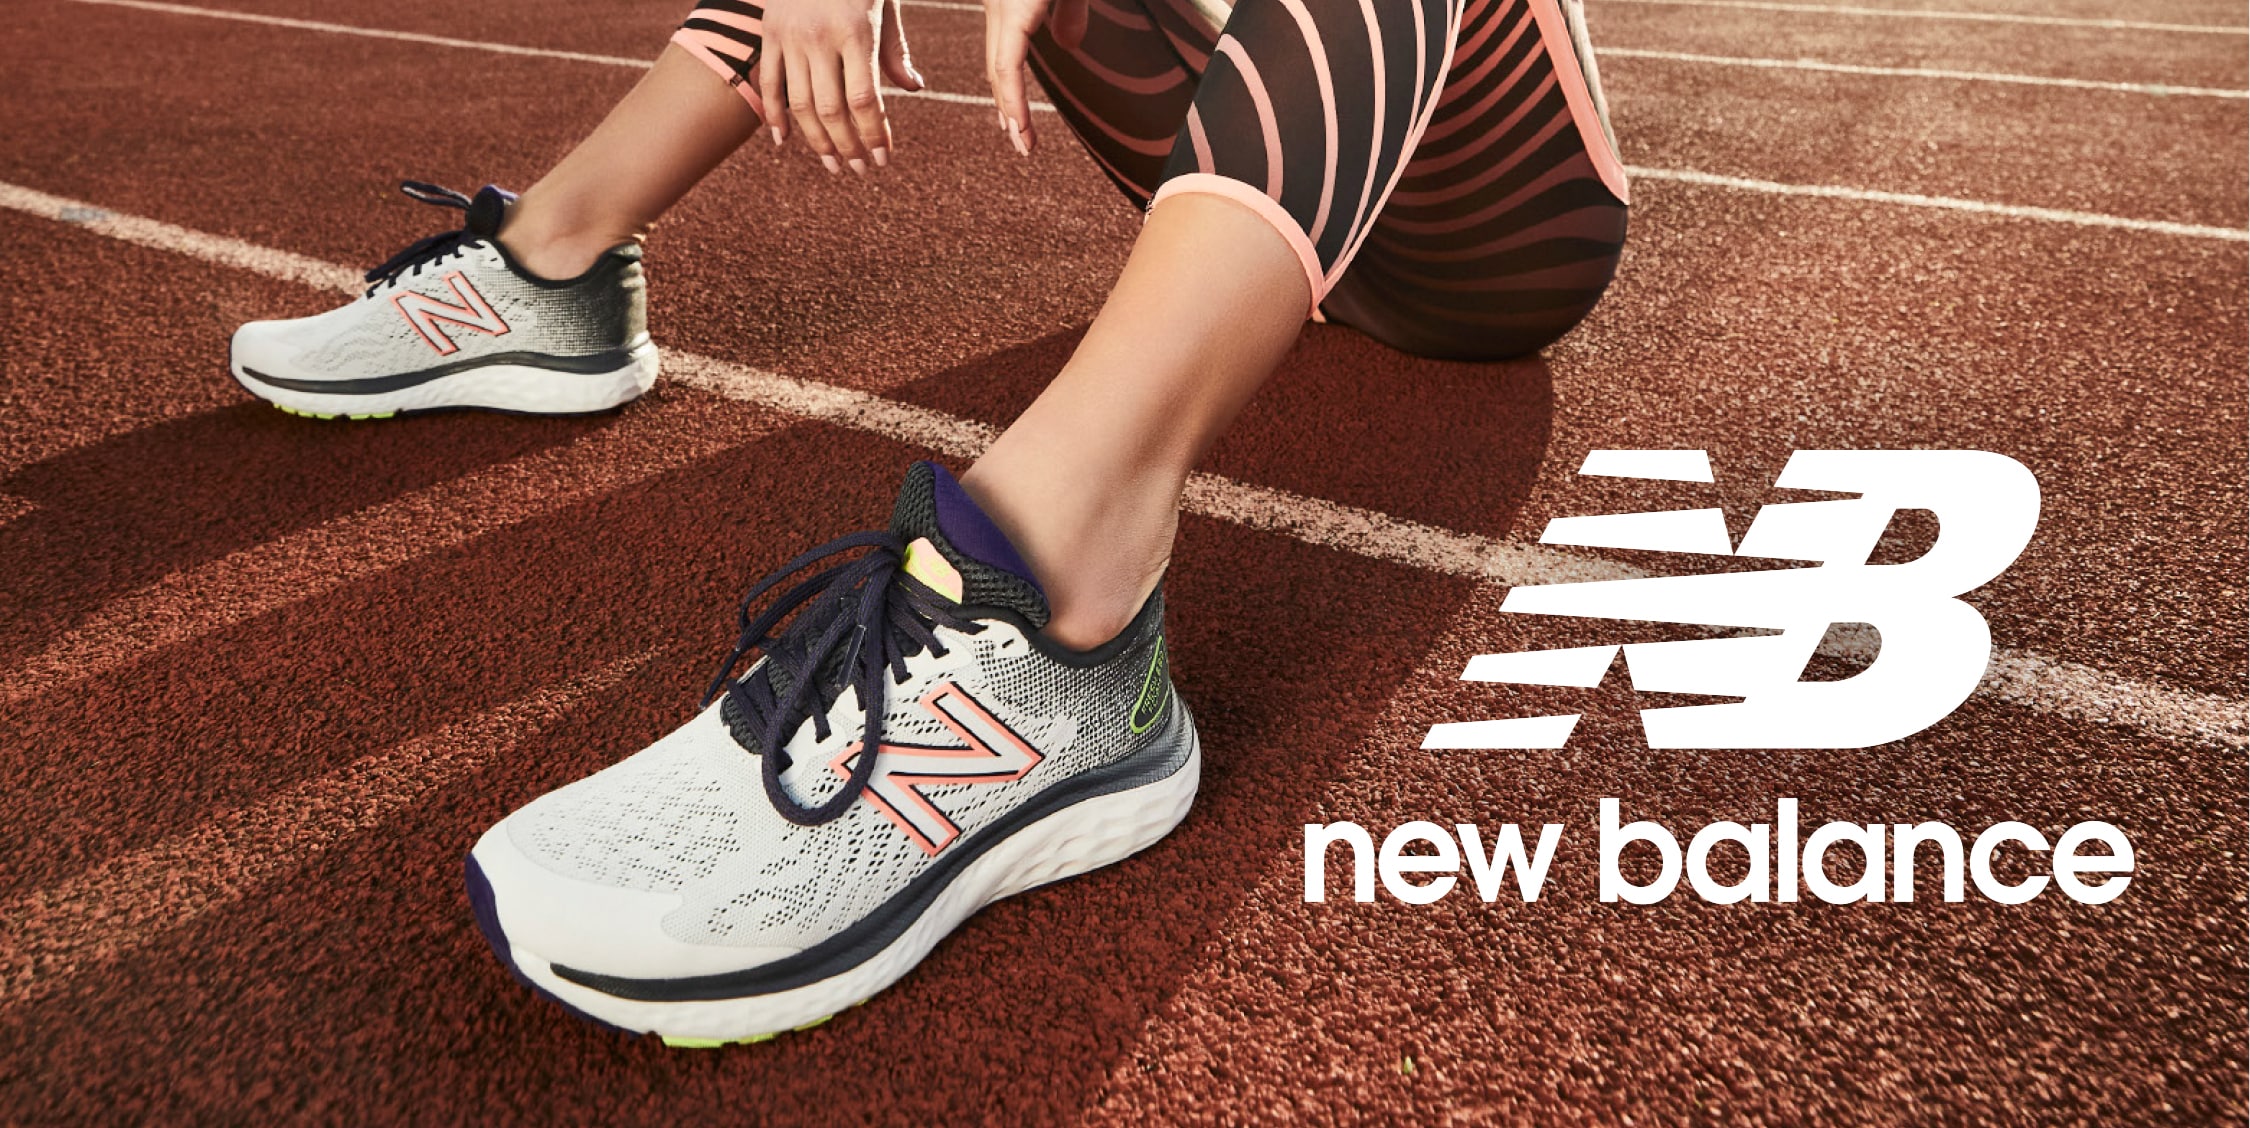 New Balance Shoes & Sneakers | Running & Tennis Shoes | DSW